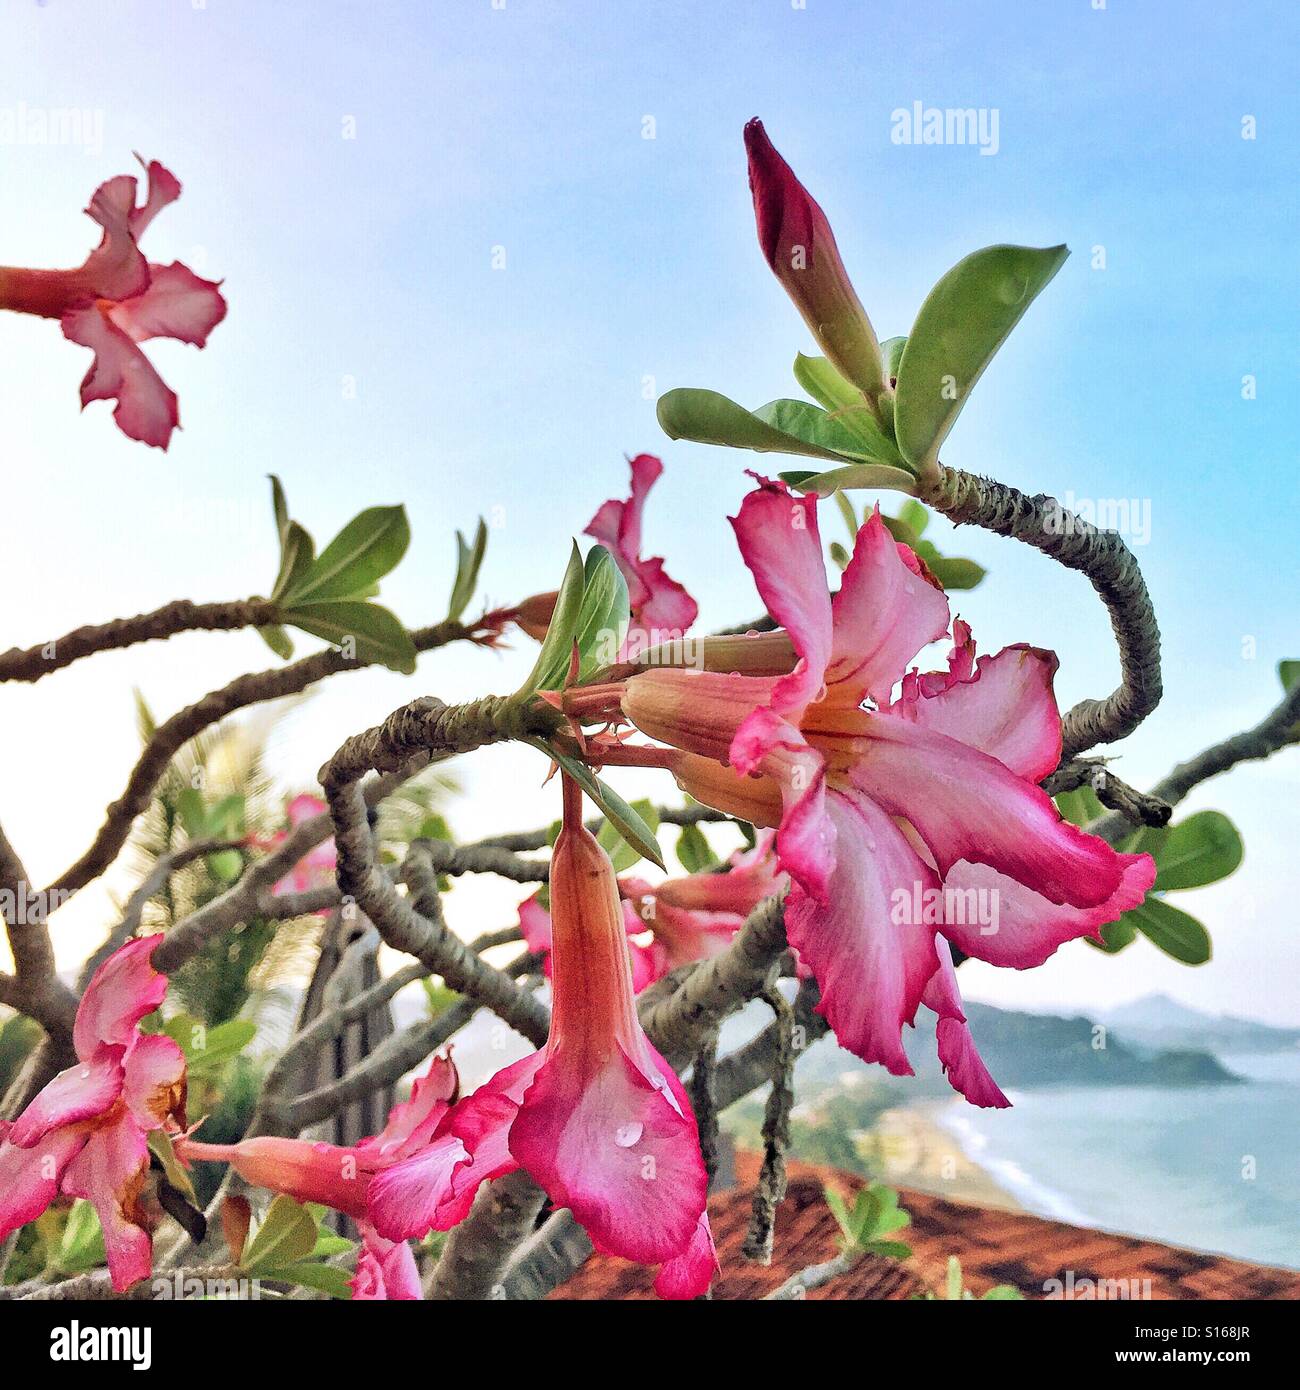 The morning after a tropical rainstorm, this desert rose looks fresh and beautiful in its location overlooking a section of Nayarit's Pacific coastline. Stock Photo